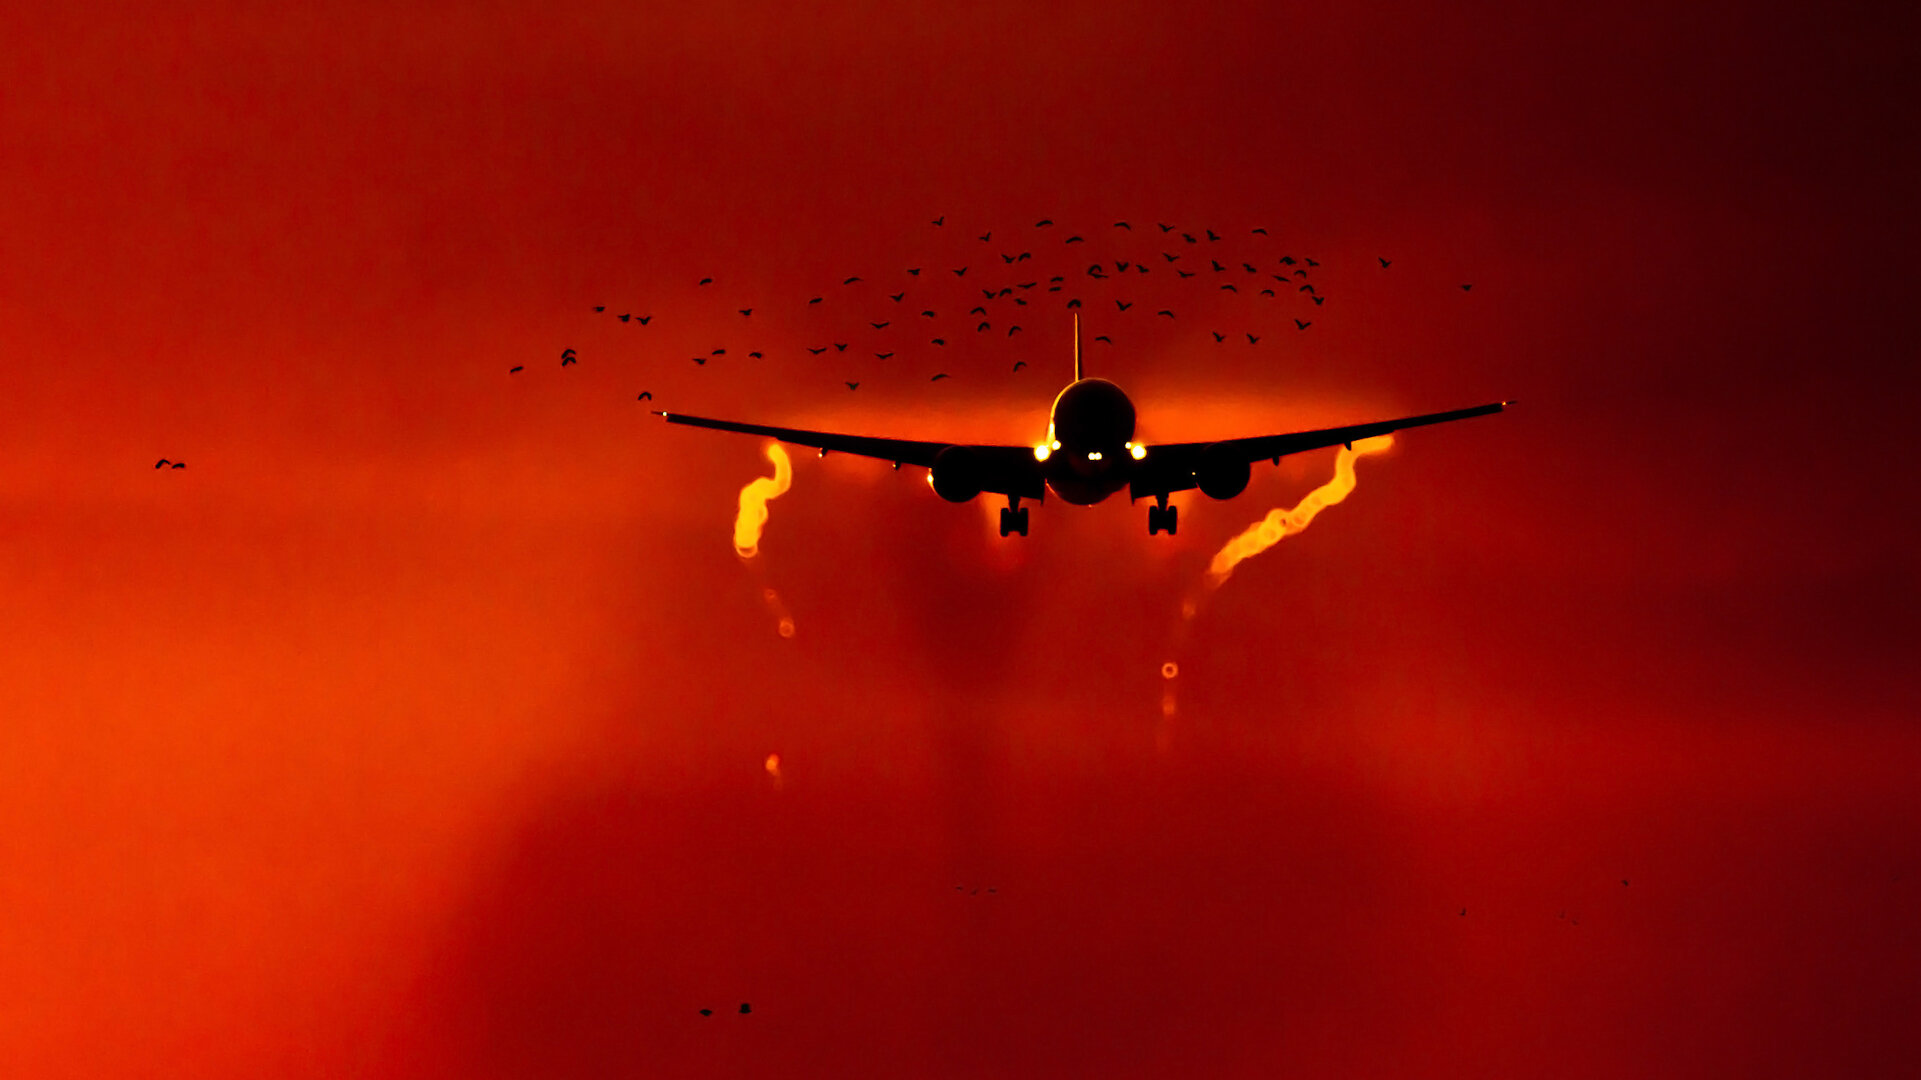 A plane is shown taking off among a flock of birds.